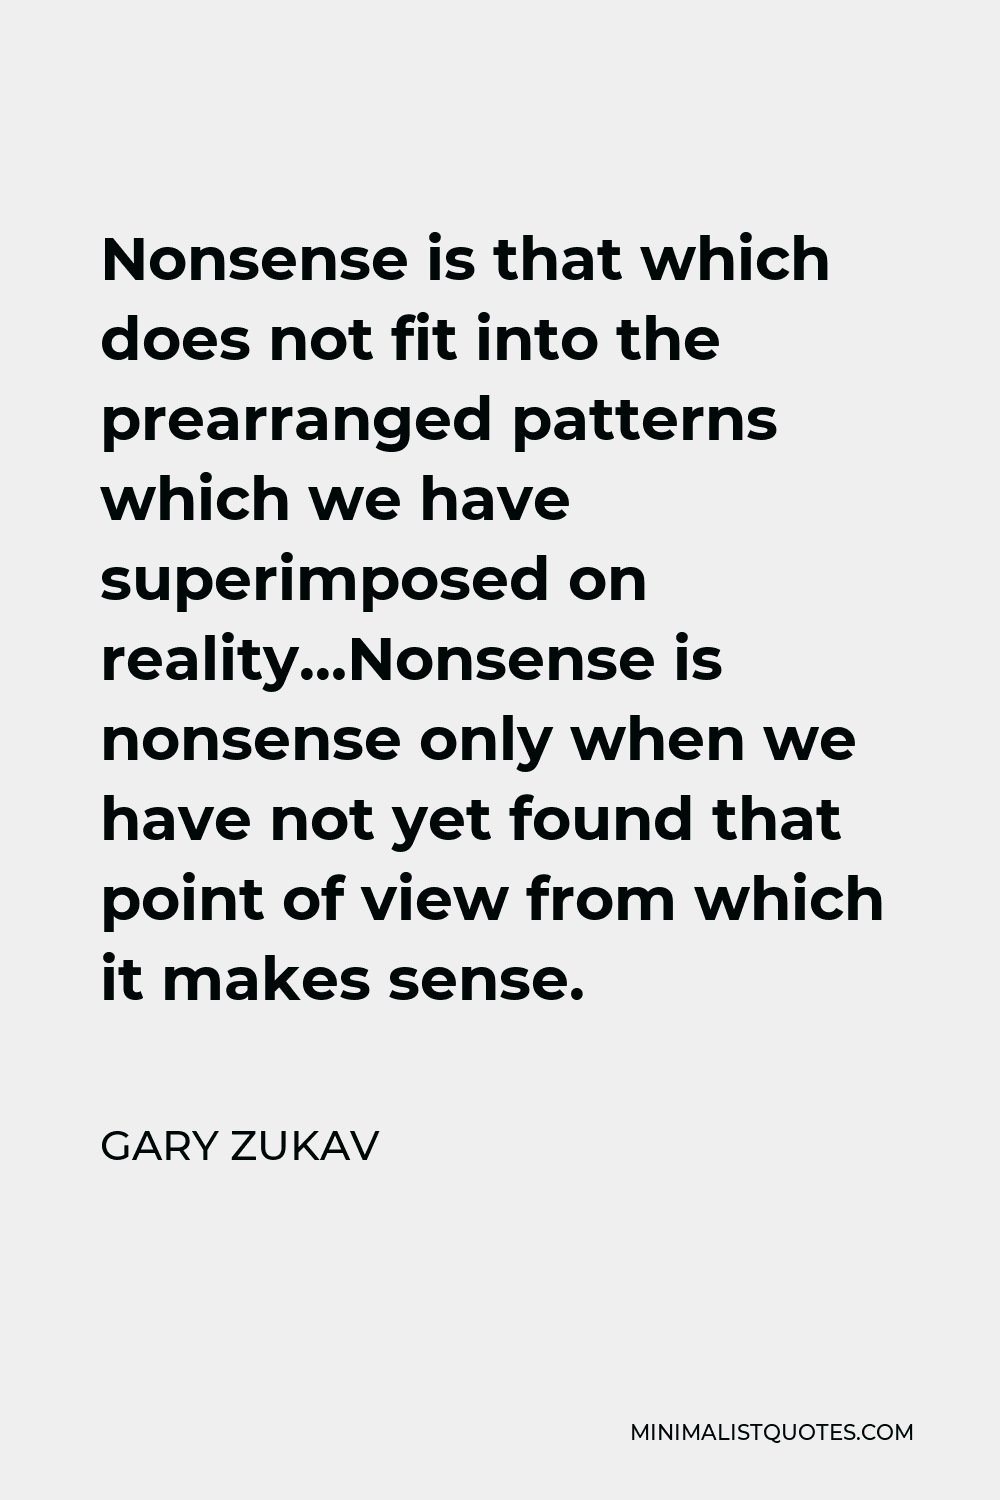 Gary Zukav Quote - Nonsense is that which does not fit into the prearranged patterns which we have superimposed on reality…Nonsense is nonsense only when we have not yet found that point of view from which it makes sense.